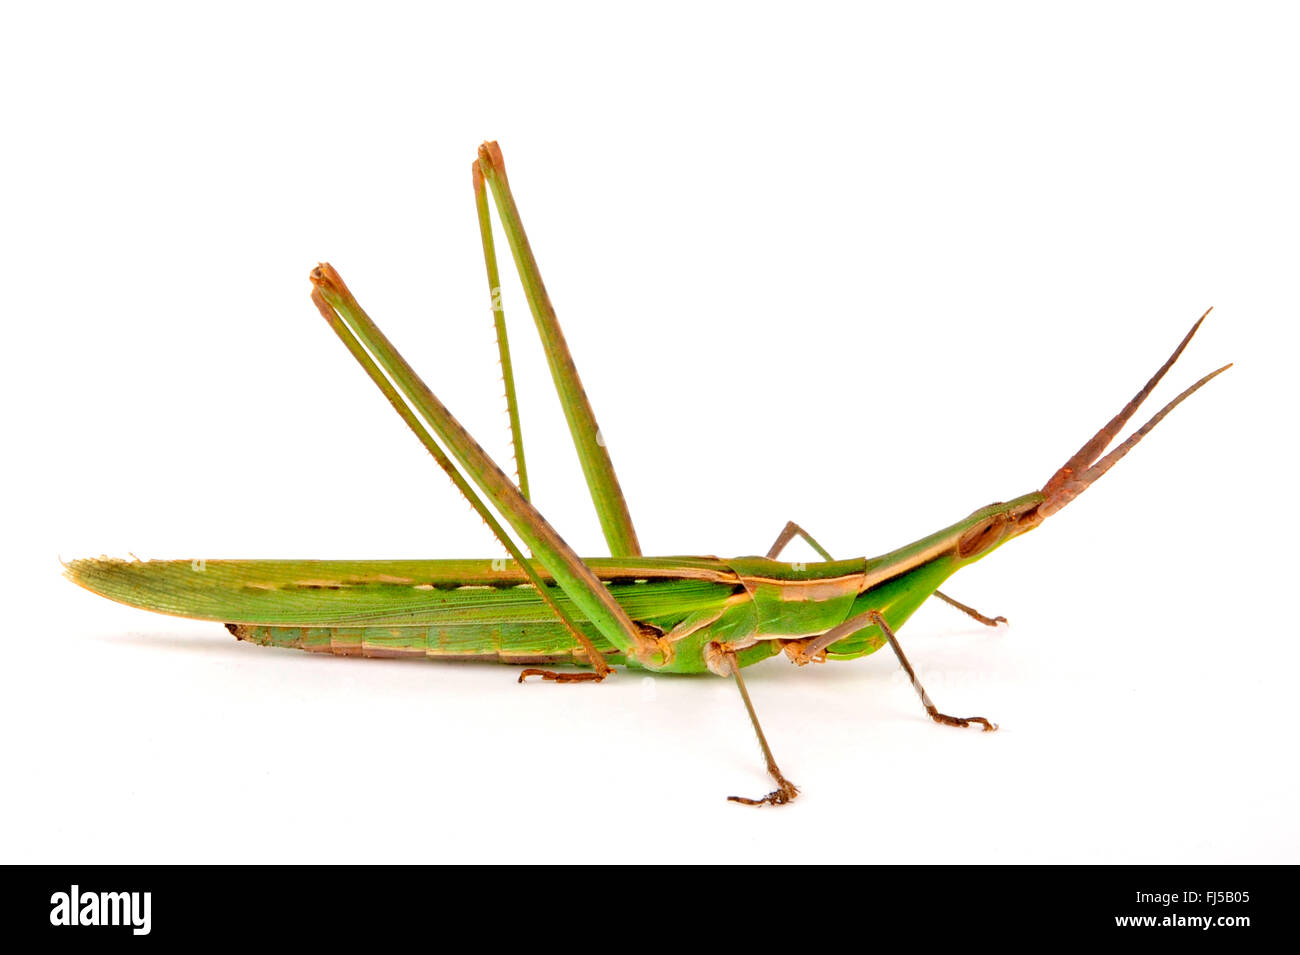 Snouted grasshopper, Long-headed grasshopper, Mediterranean Slant-faced Grasshopper, Nosed grasshopper (Acrida hungarica, Acrida ungarica, Truxalis nasuta, Truxalis conica, Truxalis turrita, Truxalis hungarica), cut-out, Greece, Peloponnese Stock Photo